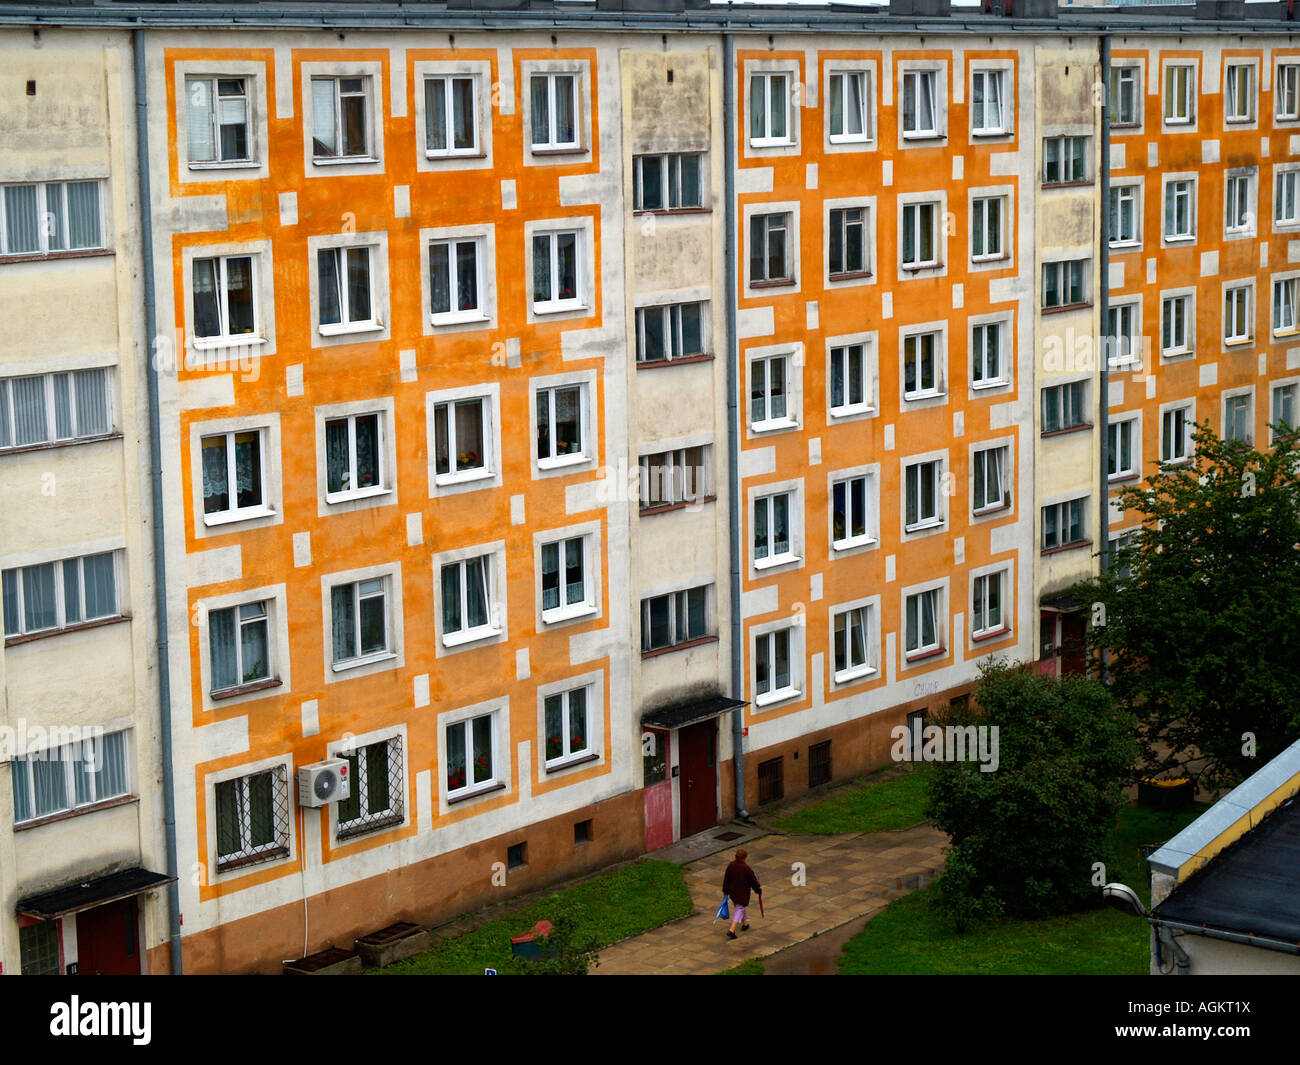 Rows and rows of six-story apartment buildings in a residential neighborhood in Suwalki, Poland. Stock Photo